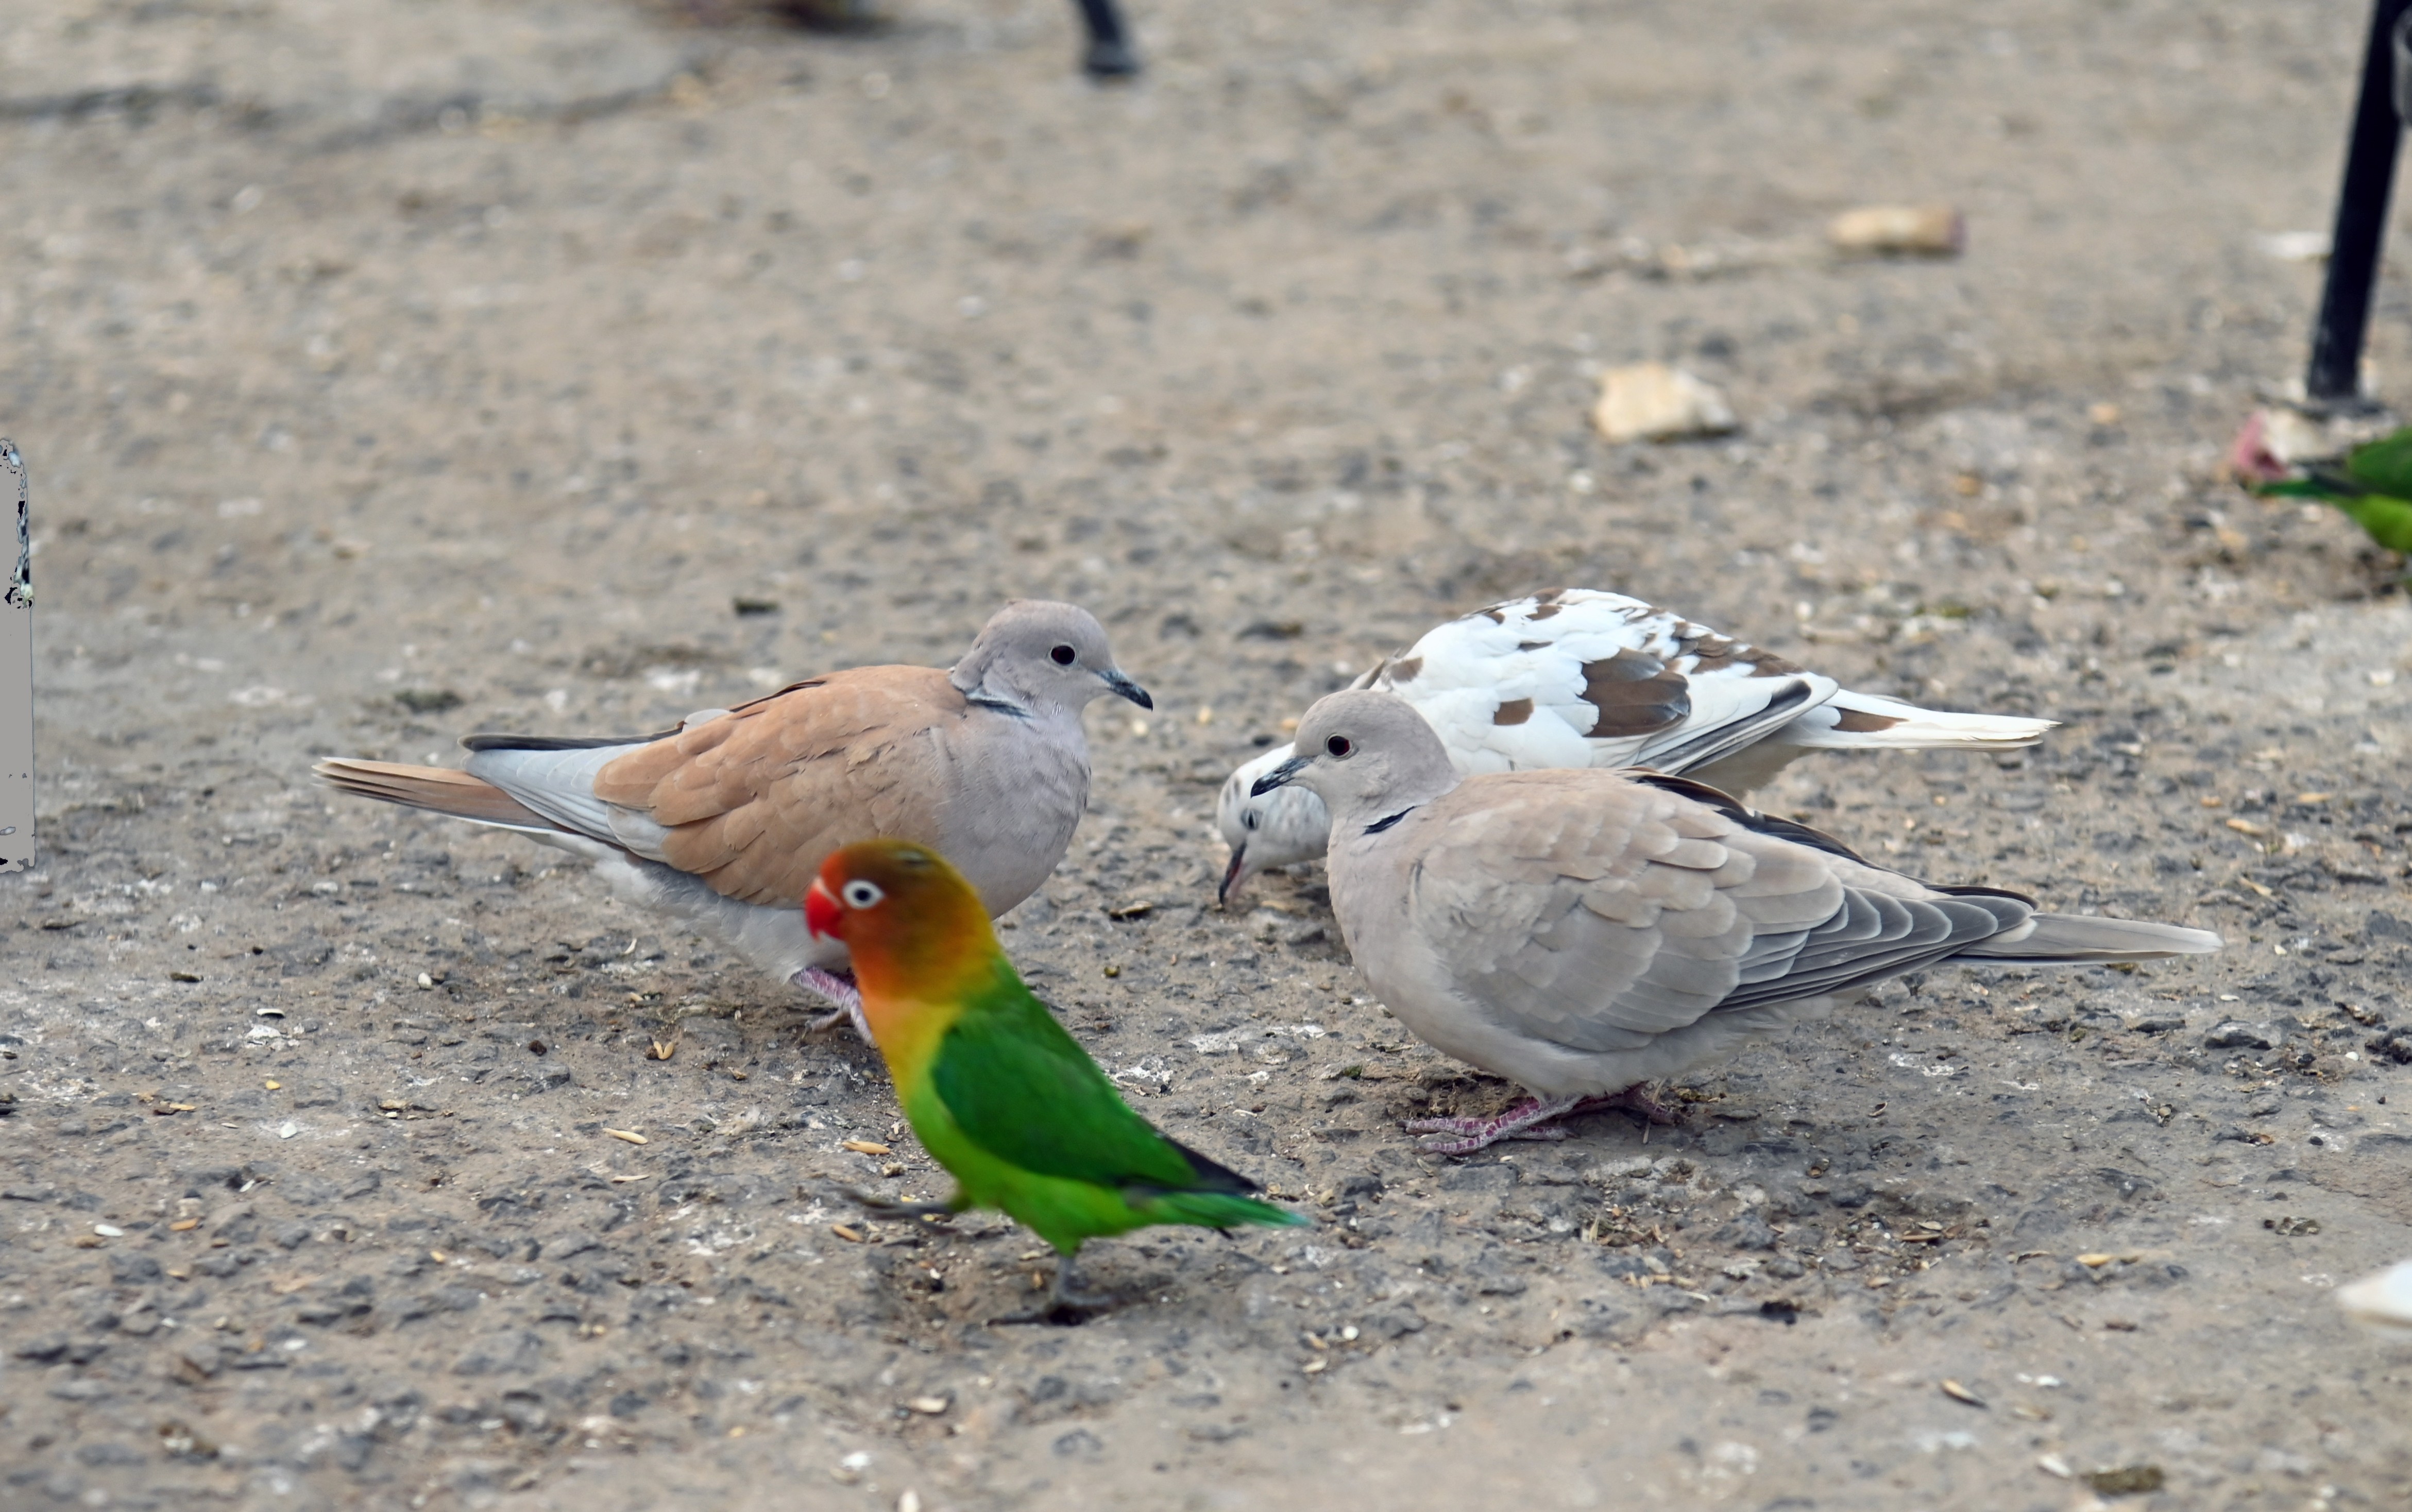 The pigeons and parrot eating grains